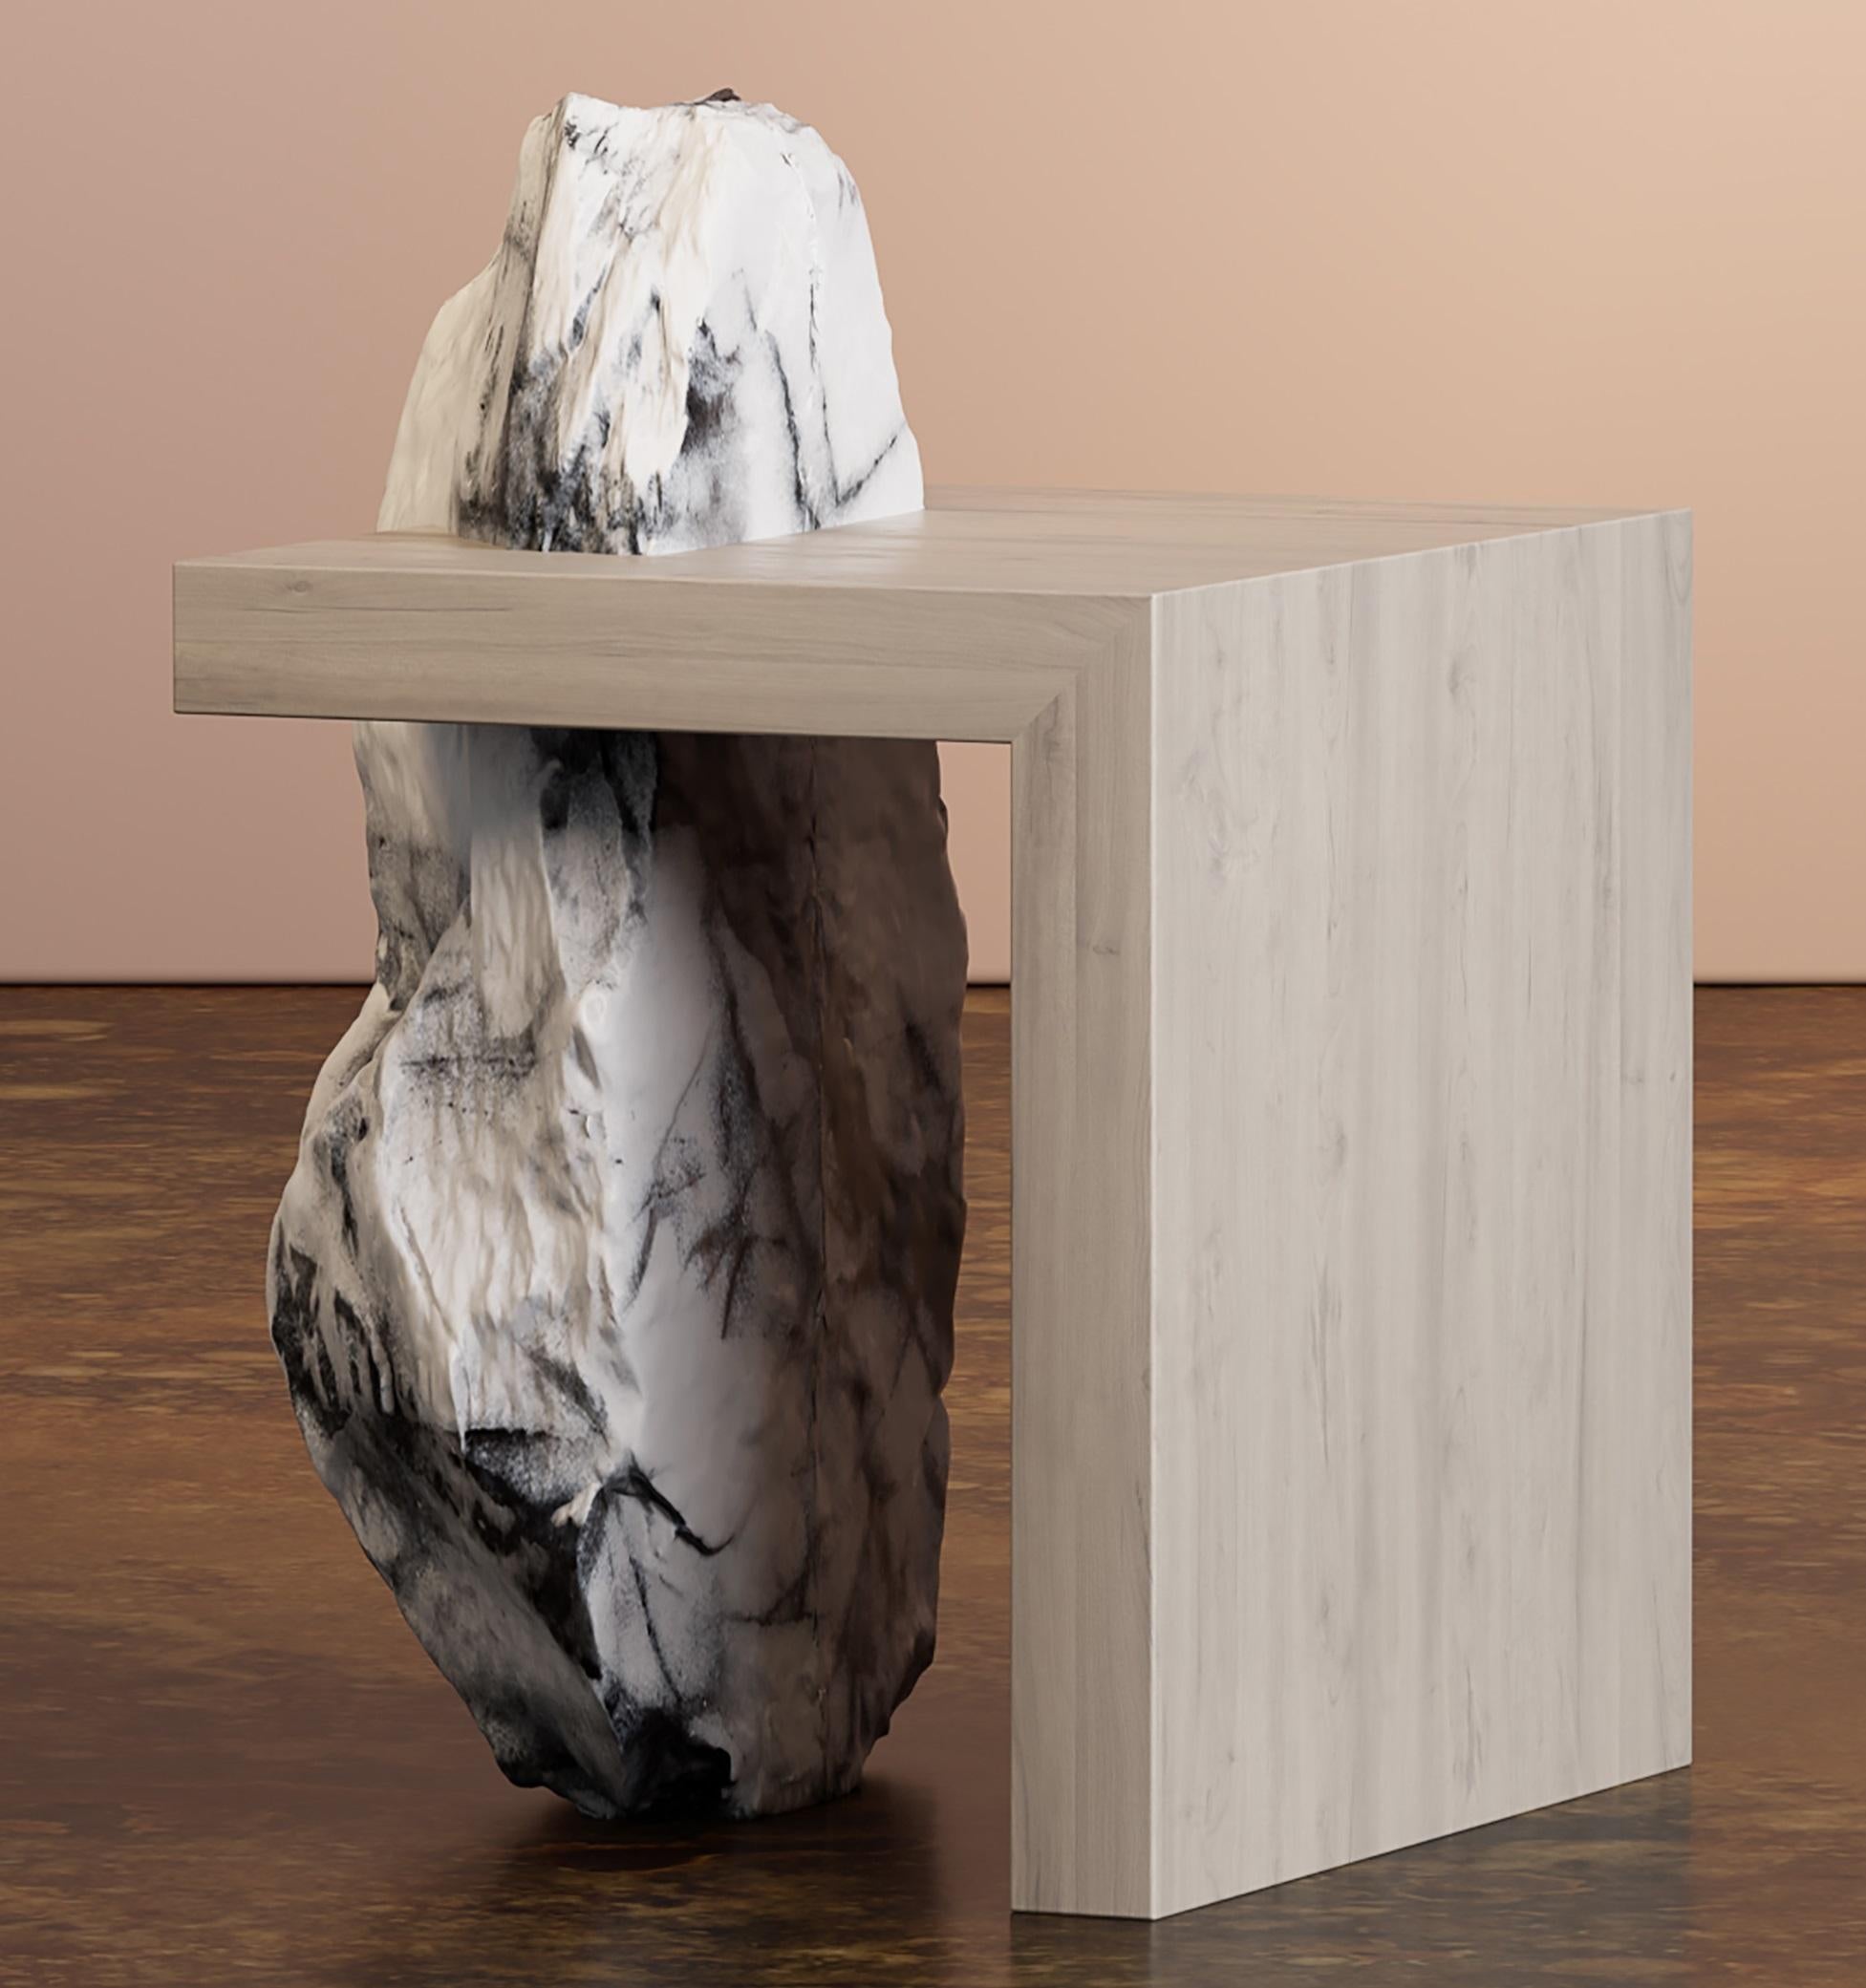 Z End Table by Bea Interiors
One of a Kind.
Dimensions: D 46 x W 46 x H 58 cm.
Materials: Weathered teak wood and Pele Tigre marble. 

Z Atus is a stunning art piece that showcases raw marble veins and an embedded wood top. It's a perfect addition